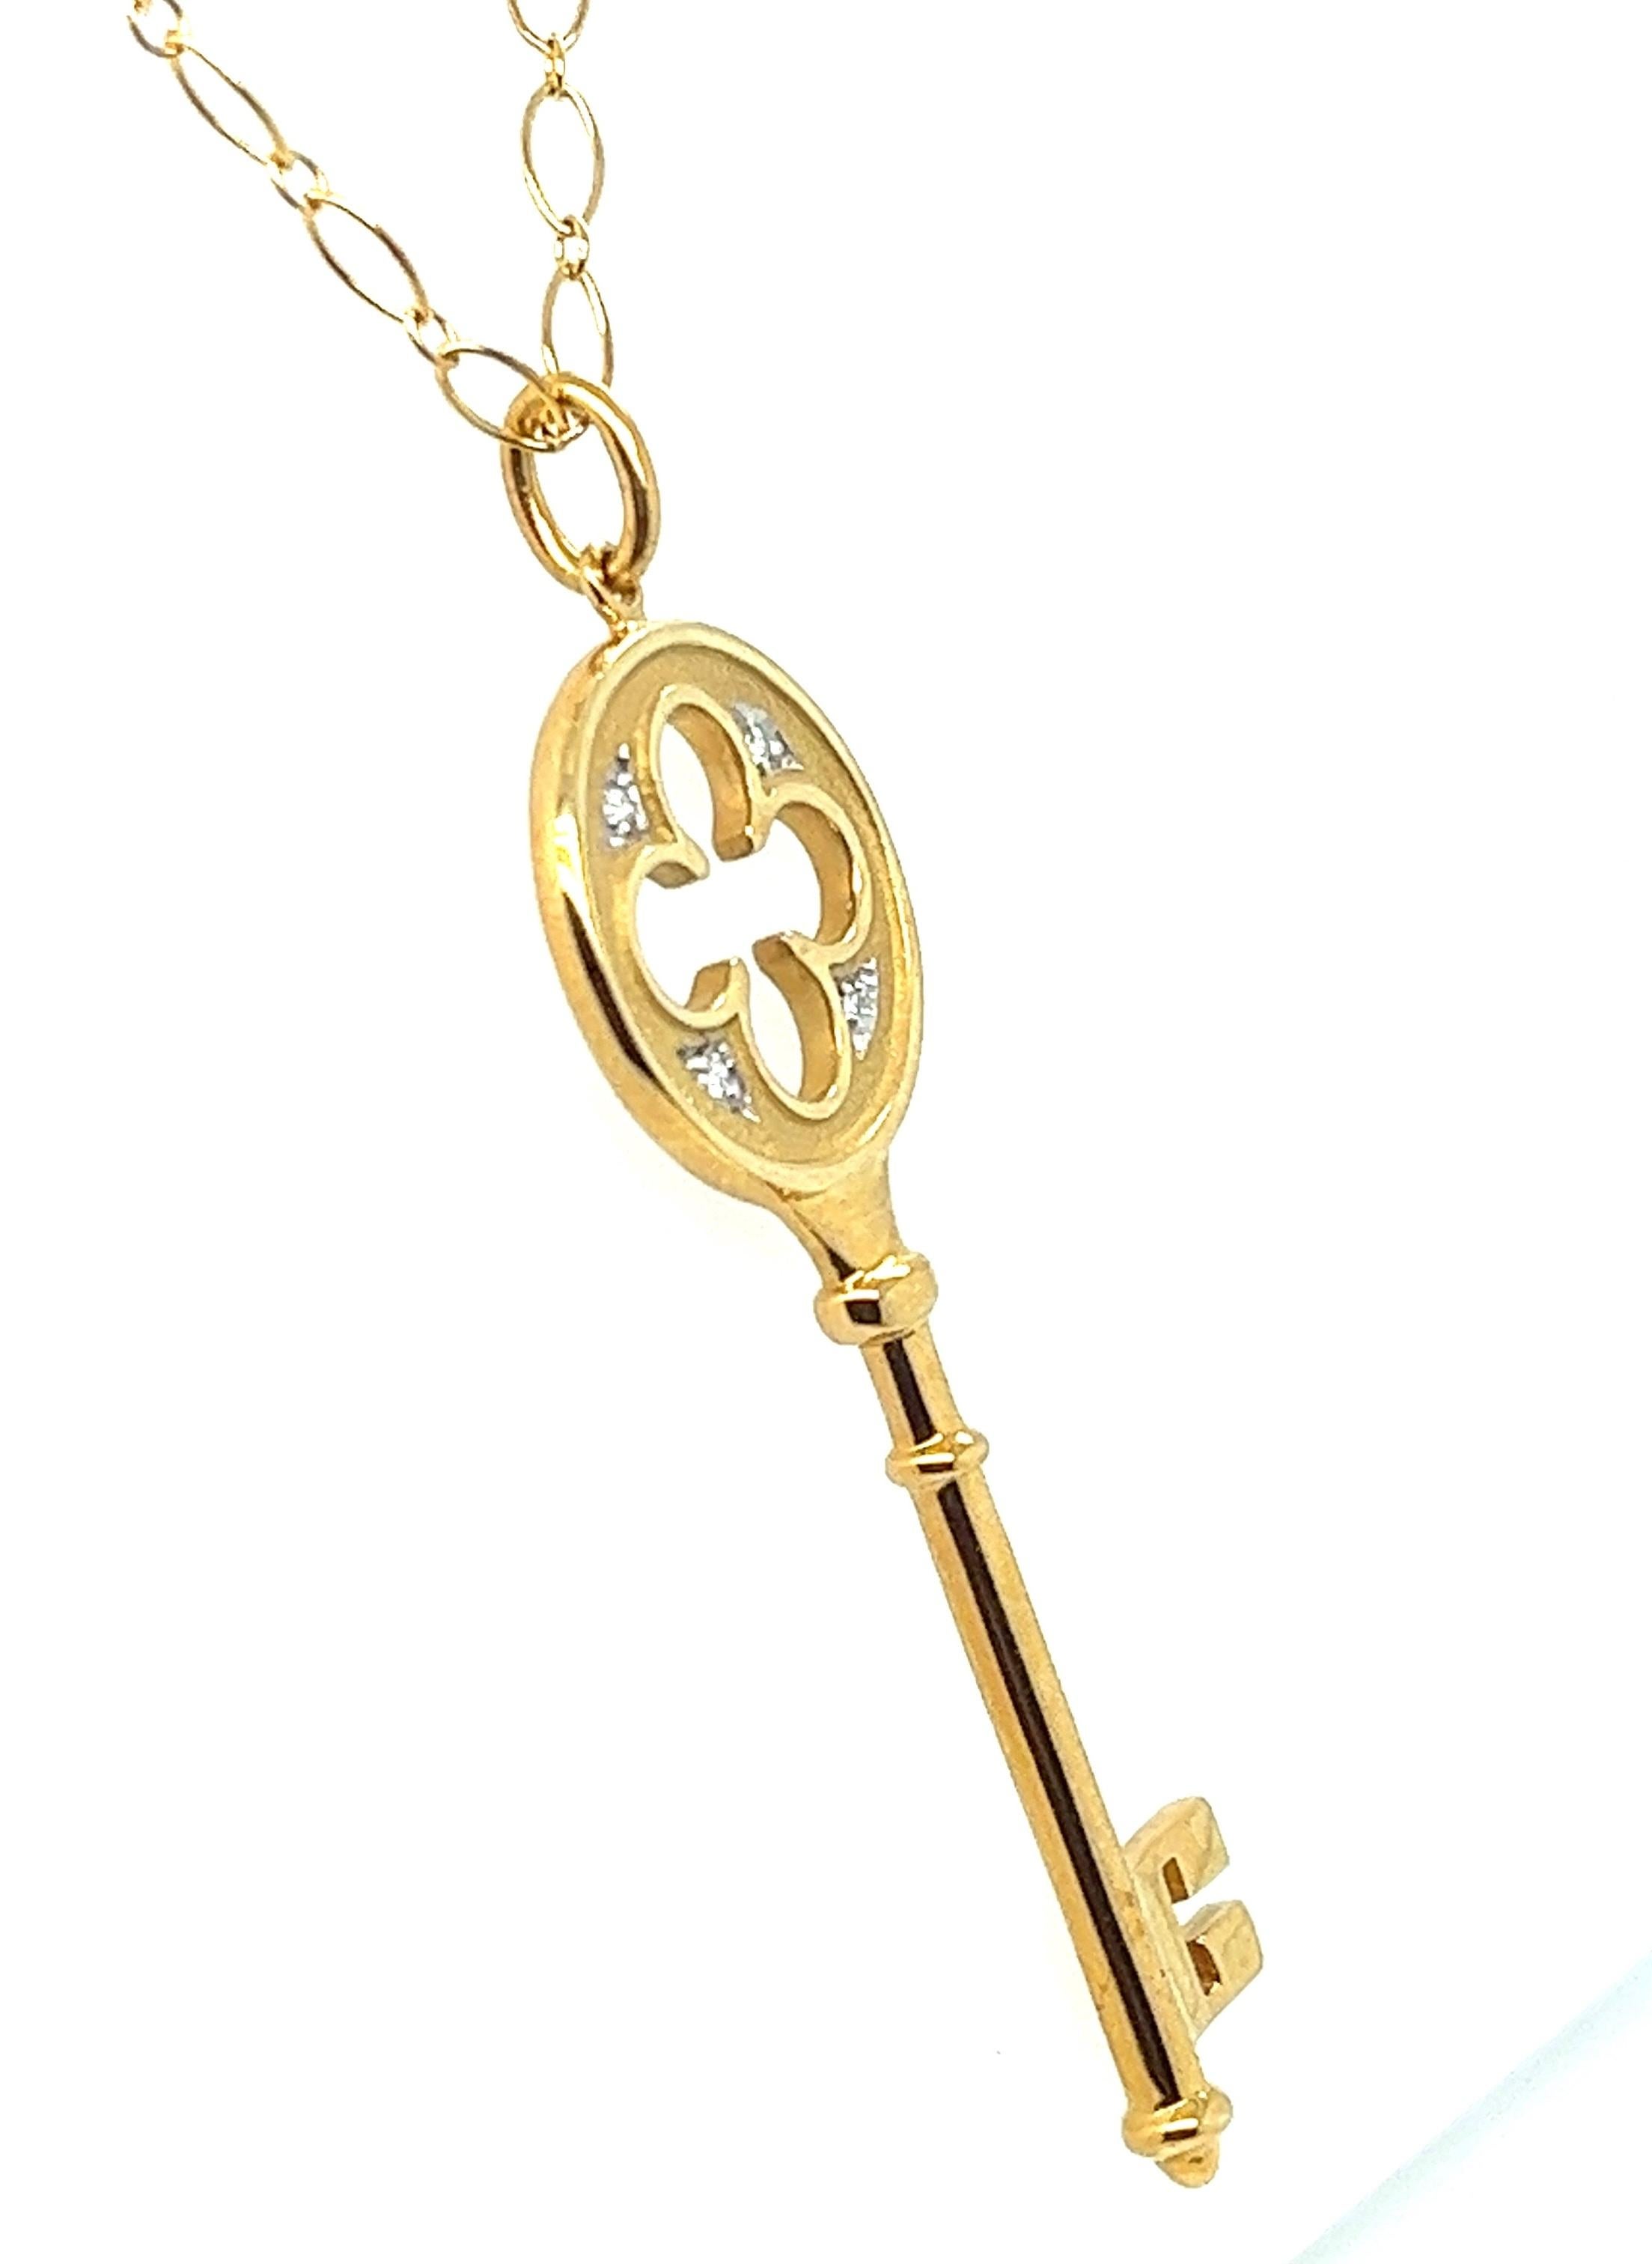 Contemporary Tiffany & Co. Diamond Clover Leaf Key Pendant in 18kt Yellow Gold , Box incl. For Sale